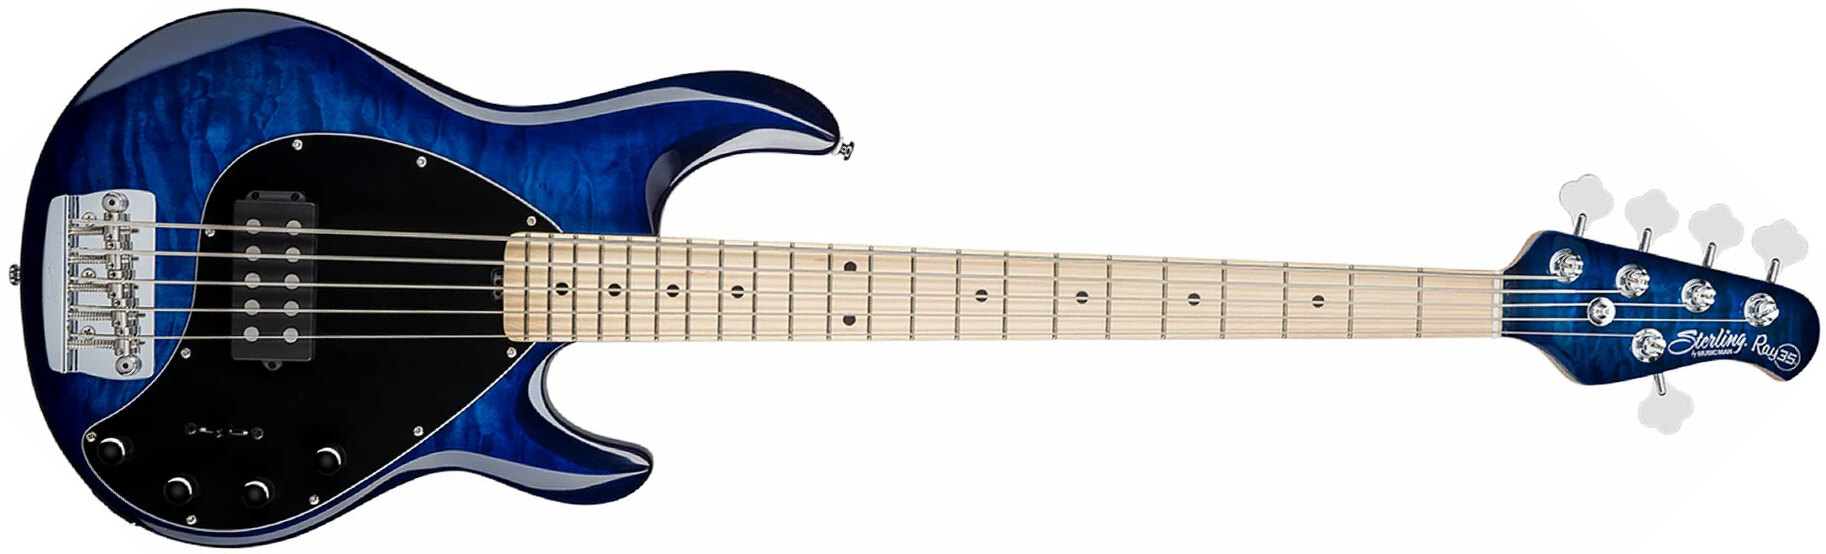 Sterling By Musicman Stingray5 Ray35qm 5-cordes Active Mn - Neptune Blue - Solid body elektrische bas - Main picture